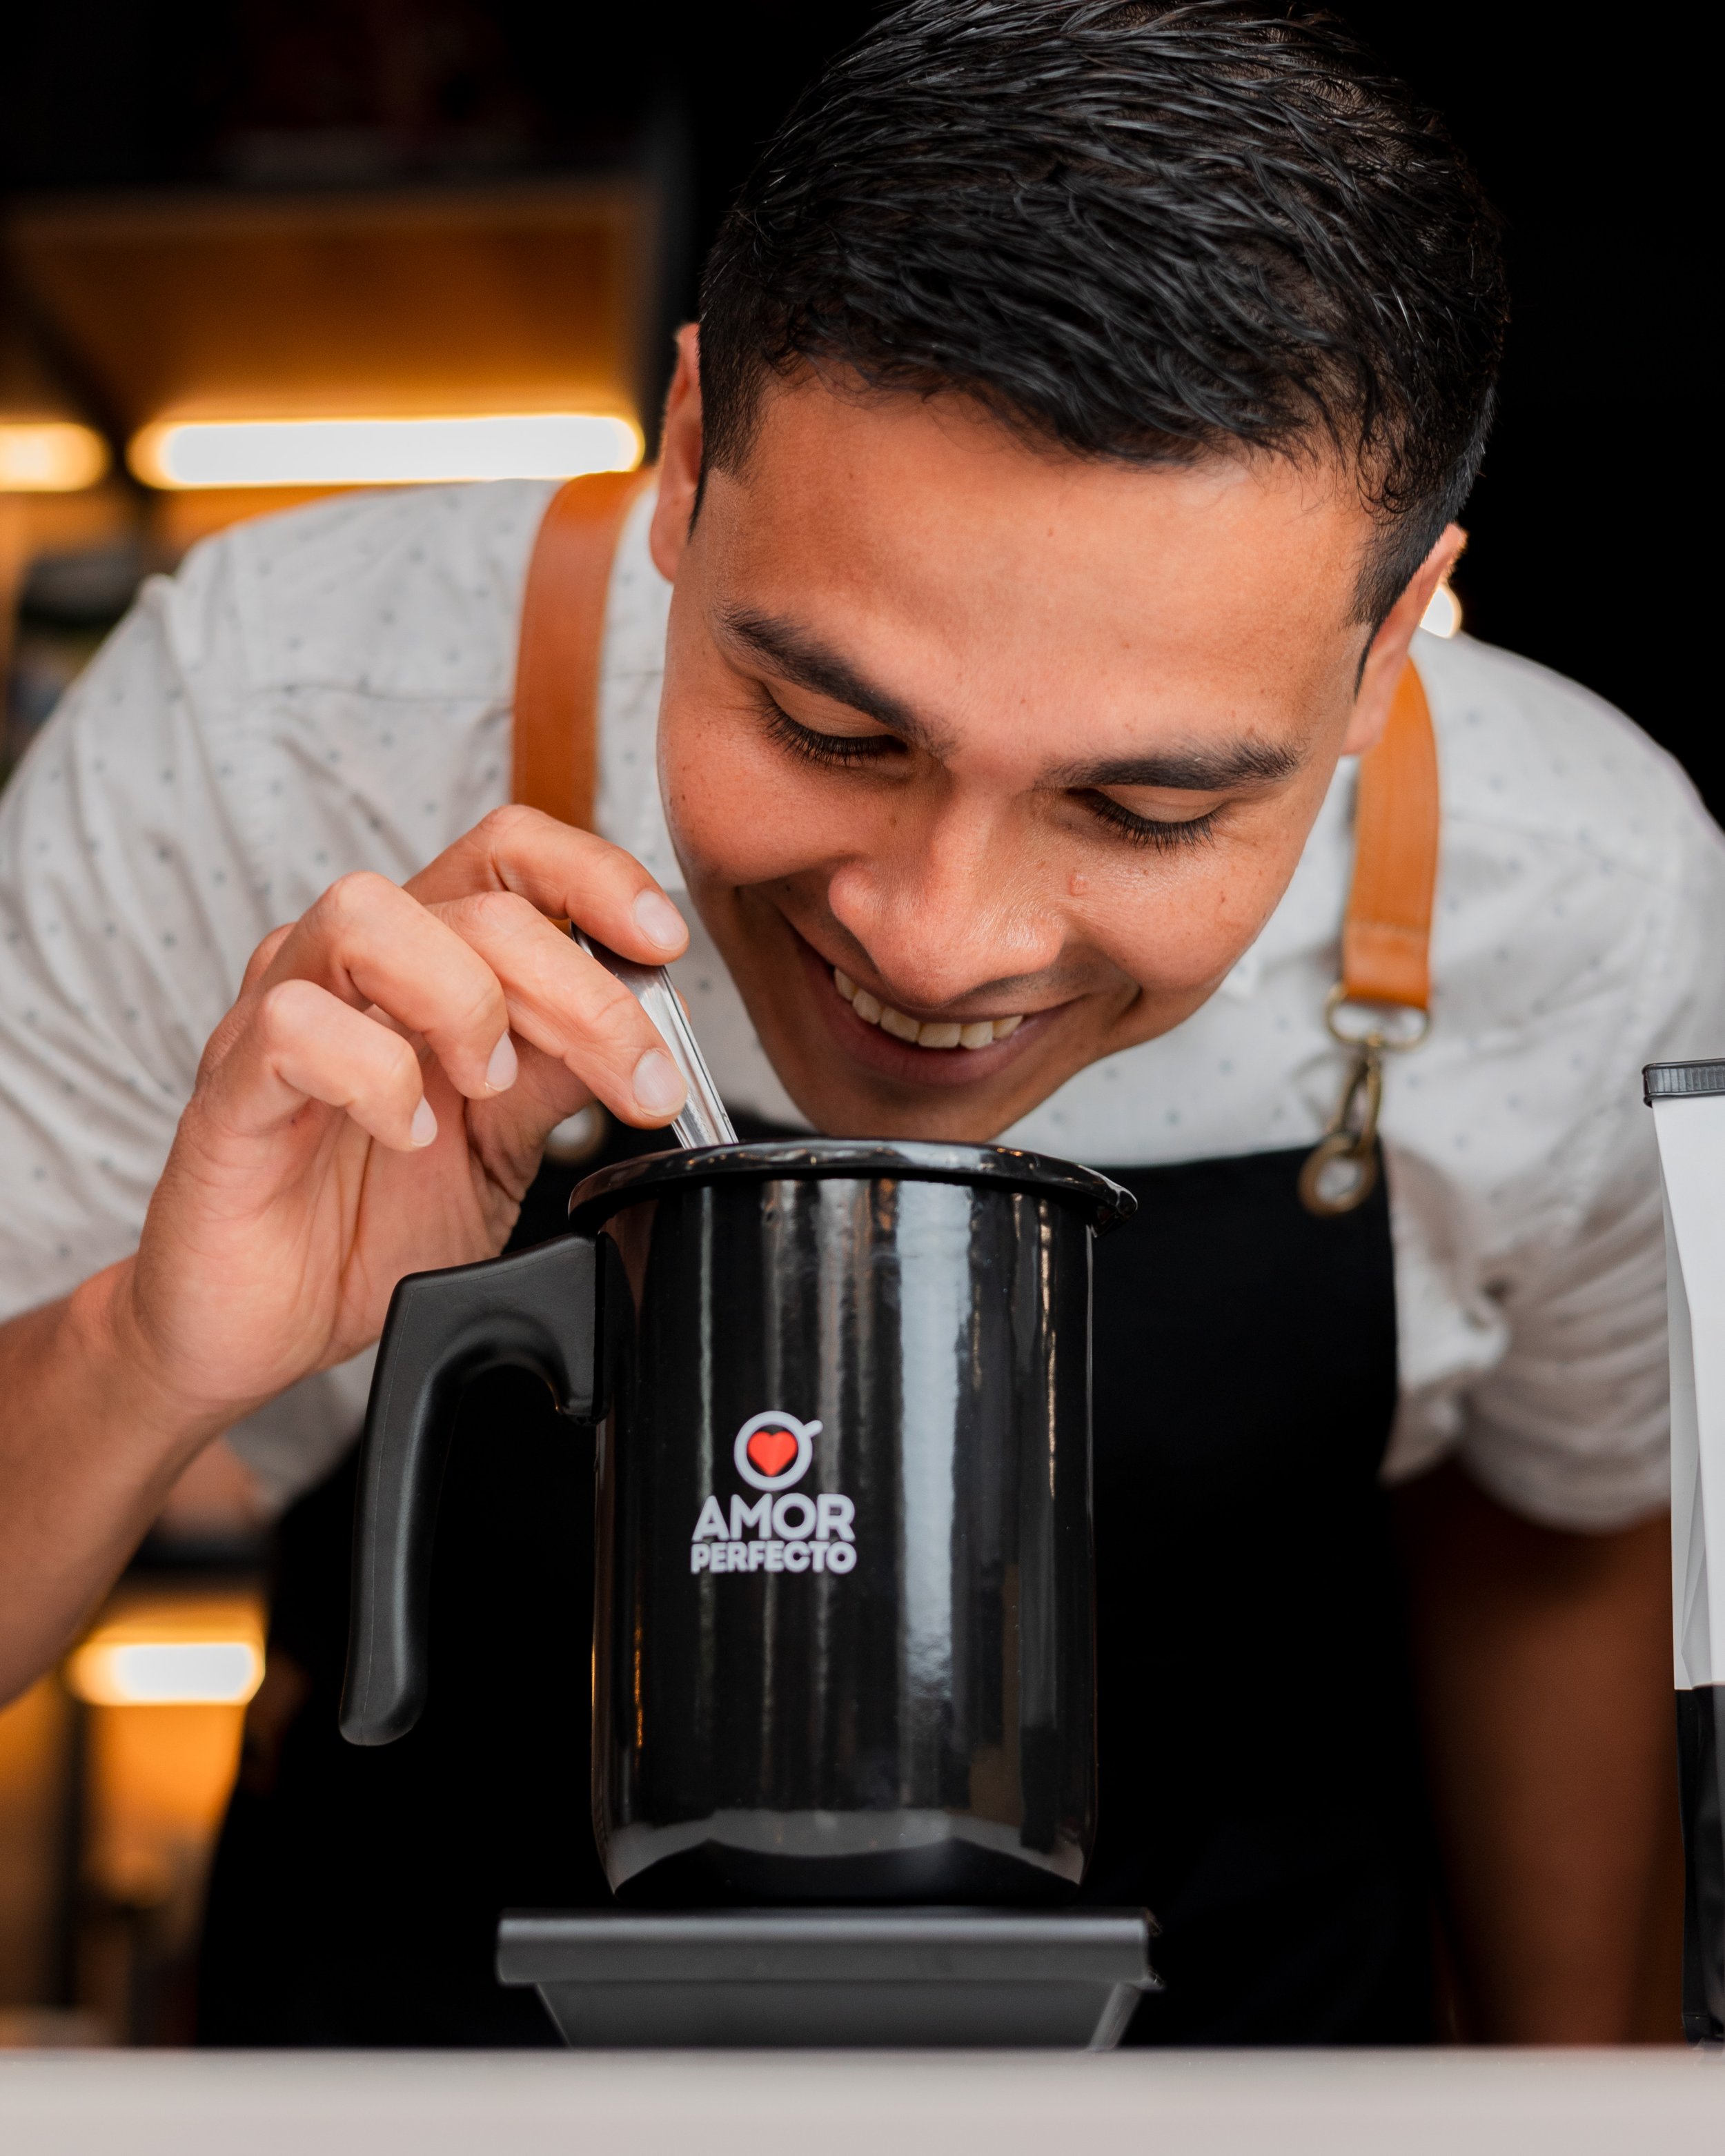 Olla Cafetera  Filtered Coffee Pot — New in Coffee